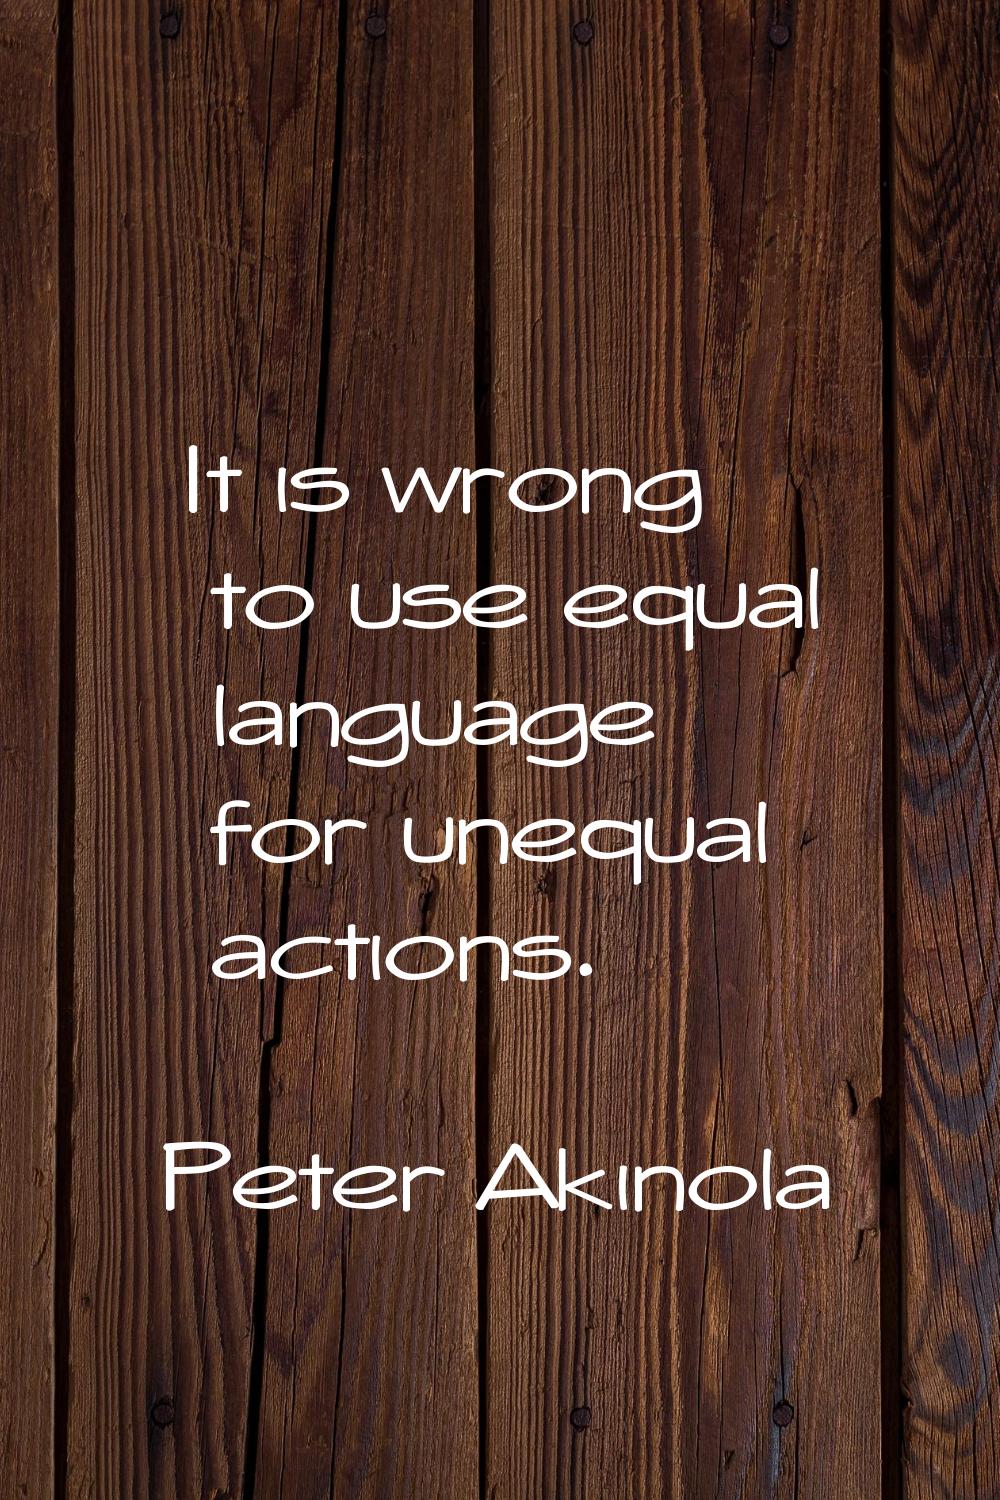 It is wrong to use equal language for unequal actions.